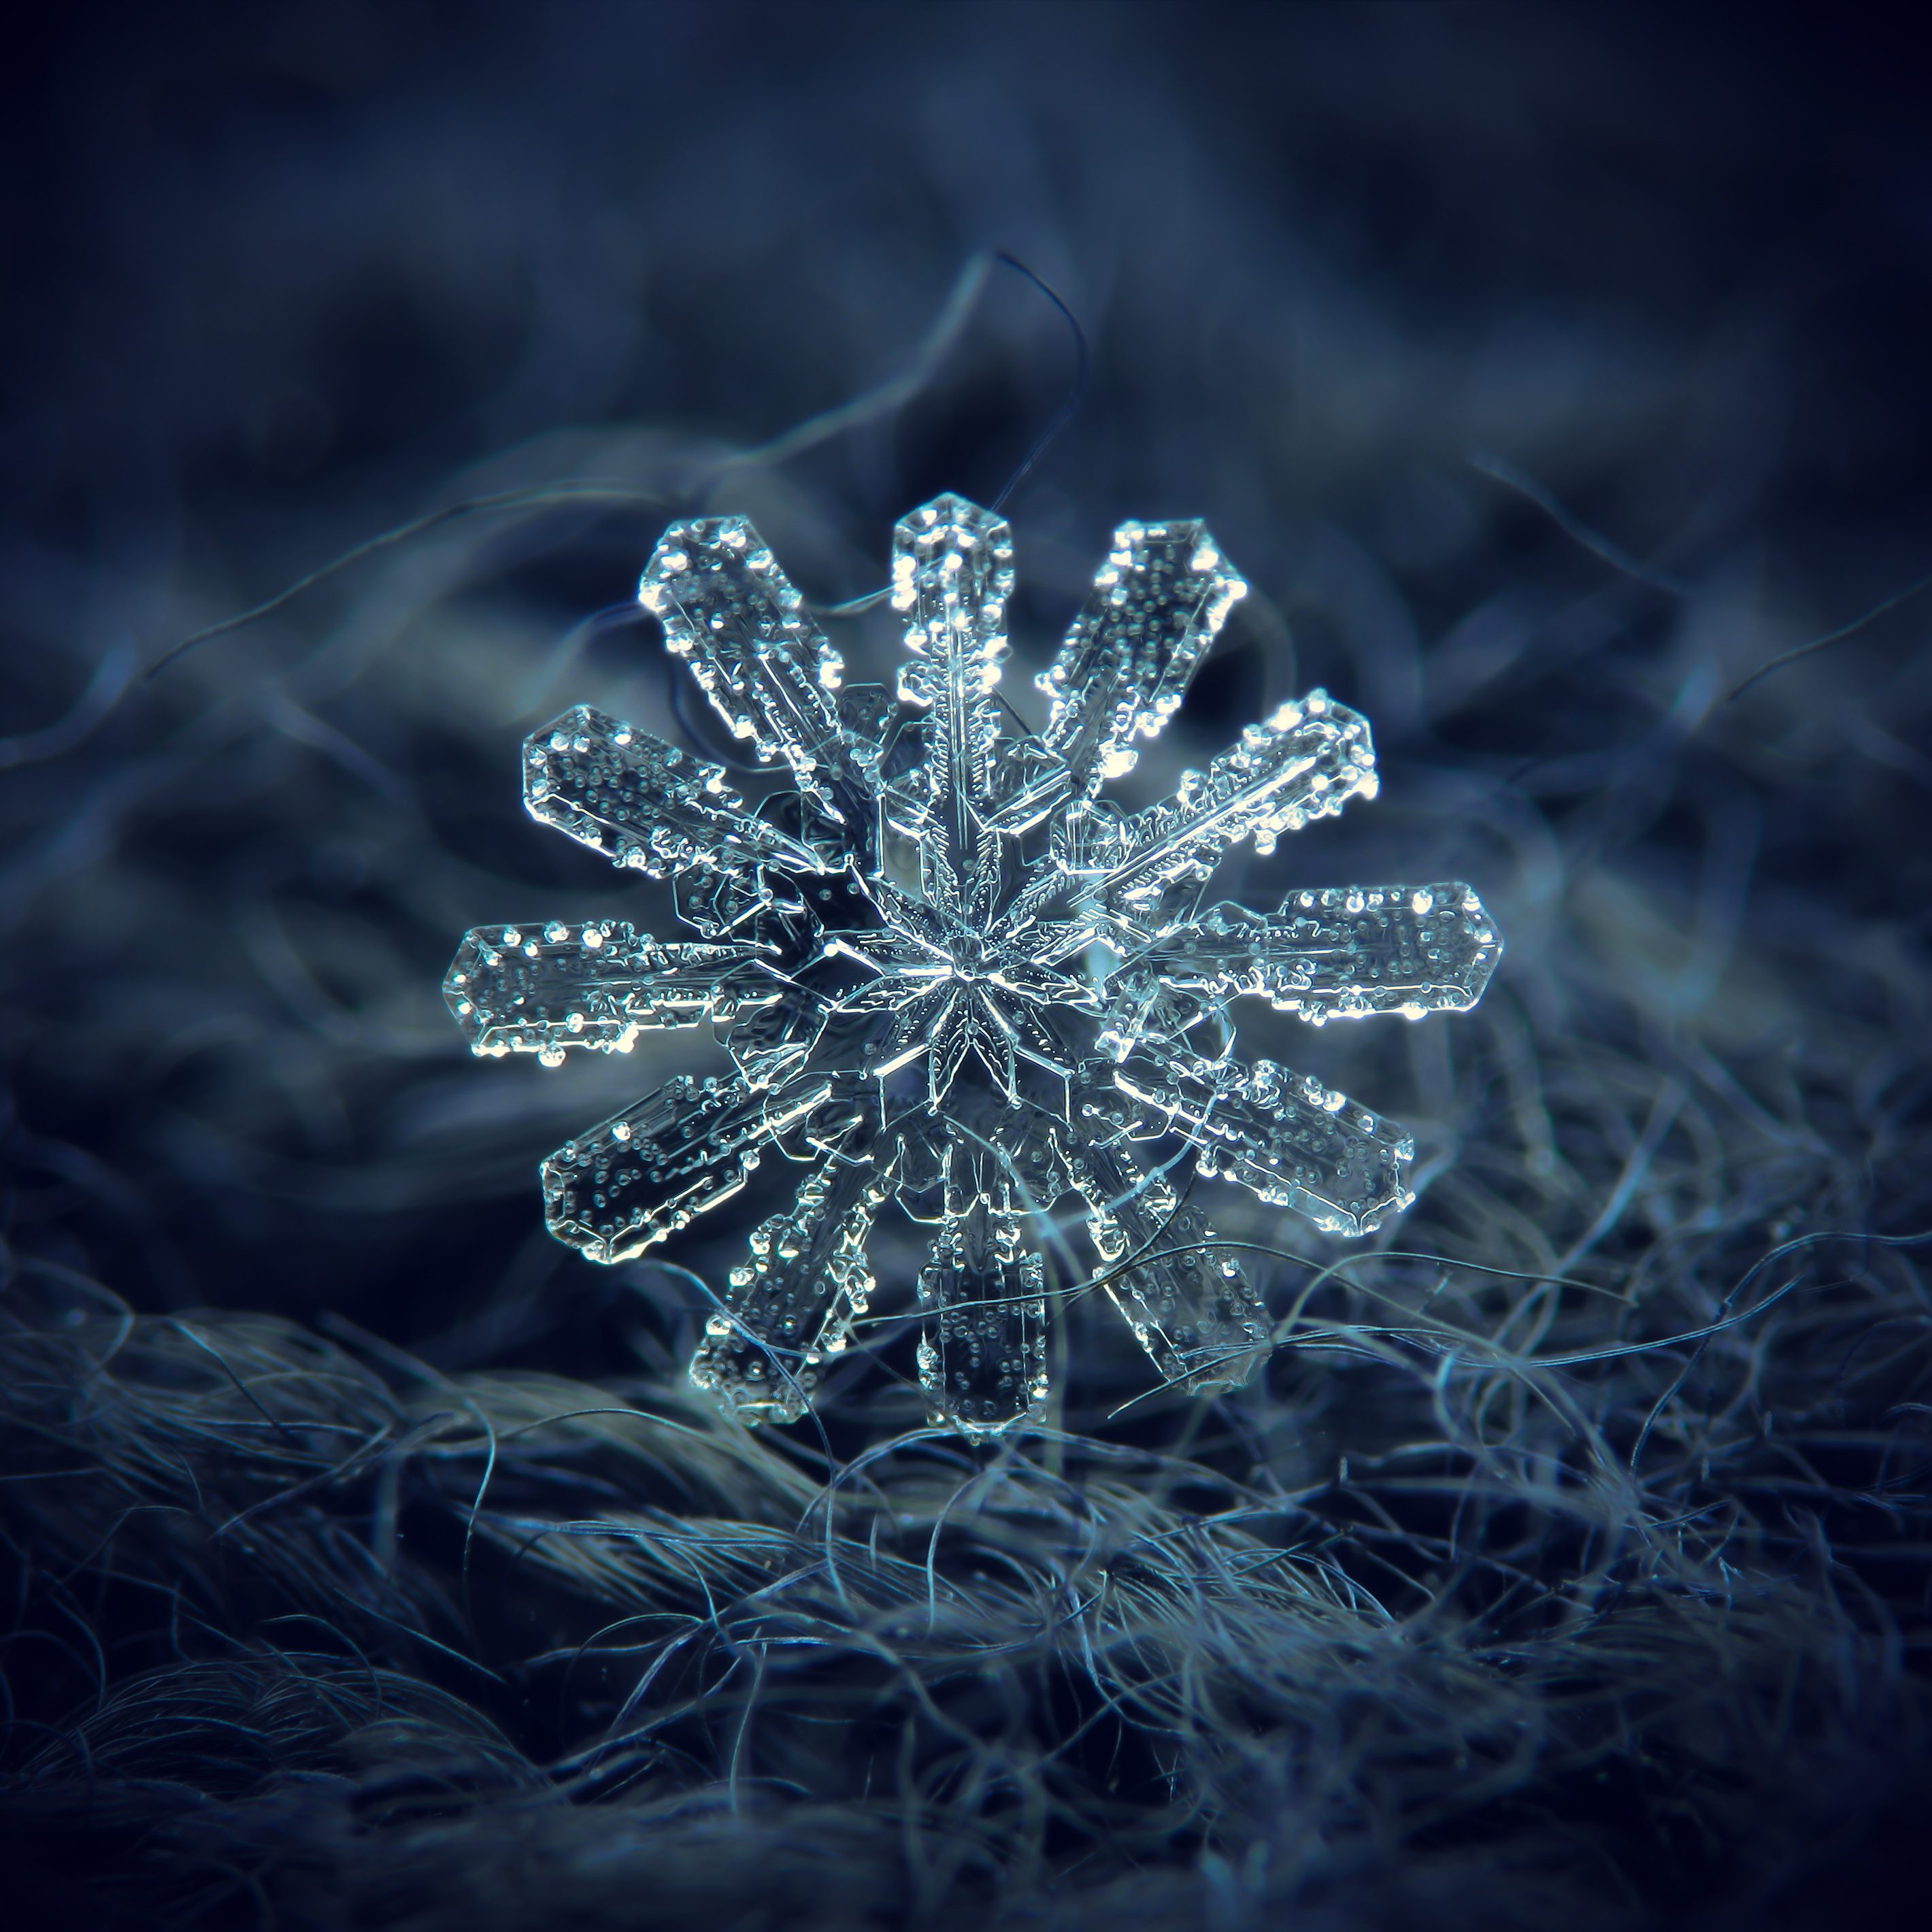 A snowflake is sitting on some grass.